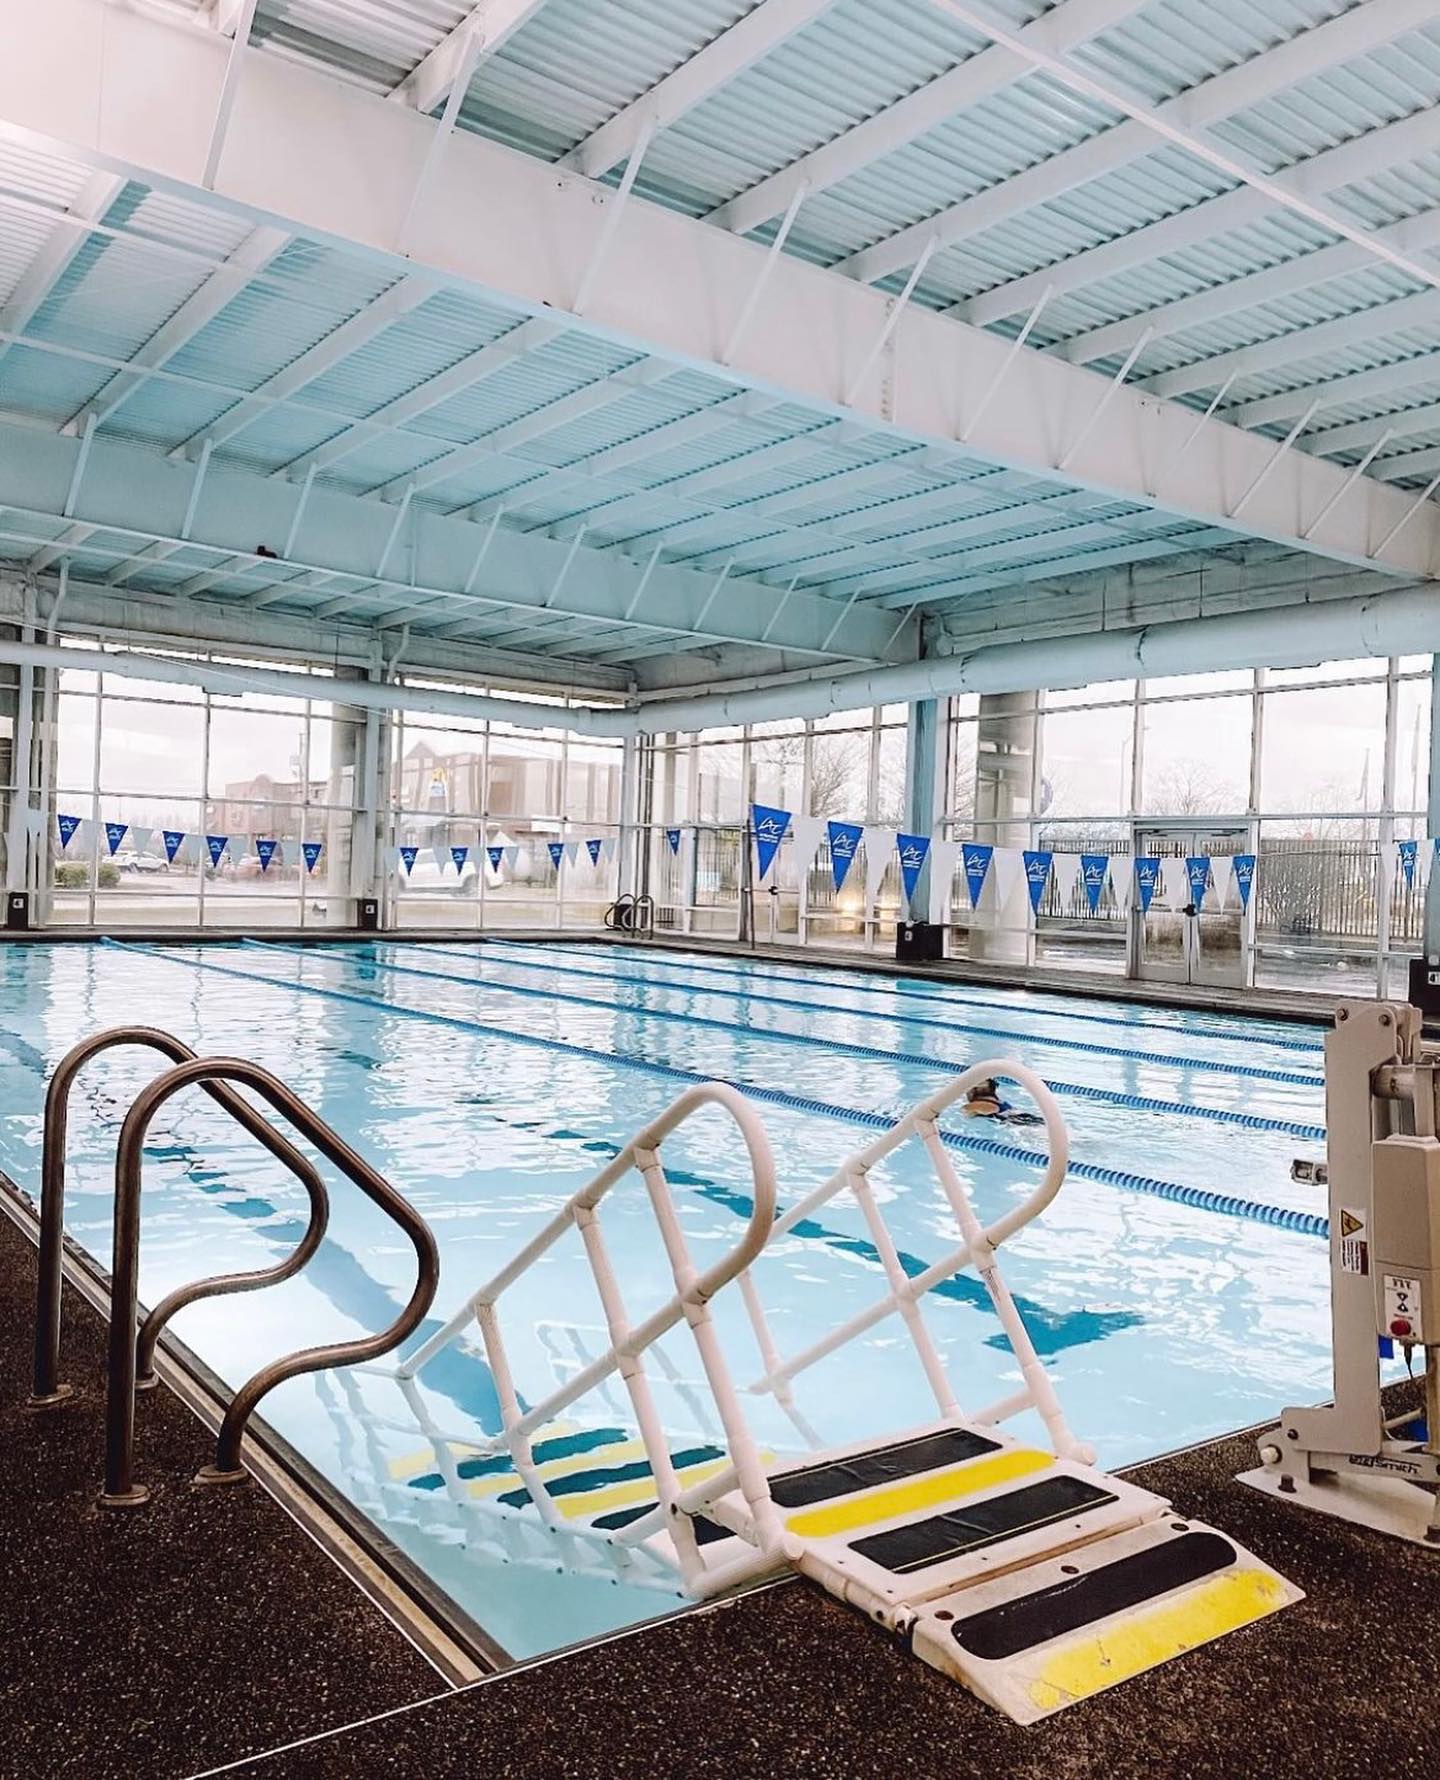 Just ONE WEEK until we will be welcoming all our new AND returning swimmers for our very first session of 2022 starting on Monday, January 24! 

We’re counting down the days on our fingers and toes until we can be in the water! 

Until then, PLEASE do not hesitate to contact us with ANY first timer questions or concerns. We are here to listen, share and pass along whatever advice you’re looking for regarding our ISR lessons. Also, our website is a great source too (see link in bio).

Please feel free to DM us or shoot us an email at c.slay@infantswim.com.